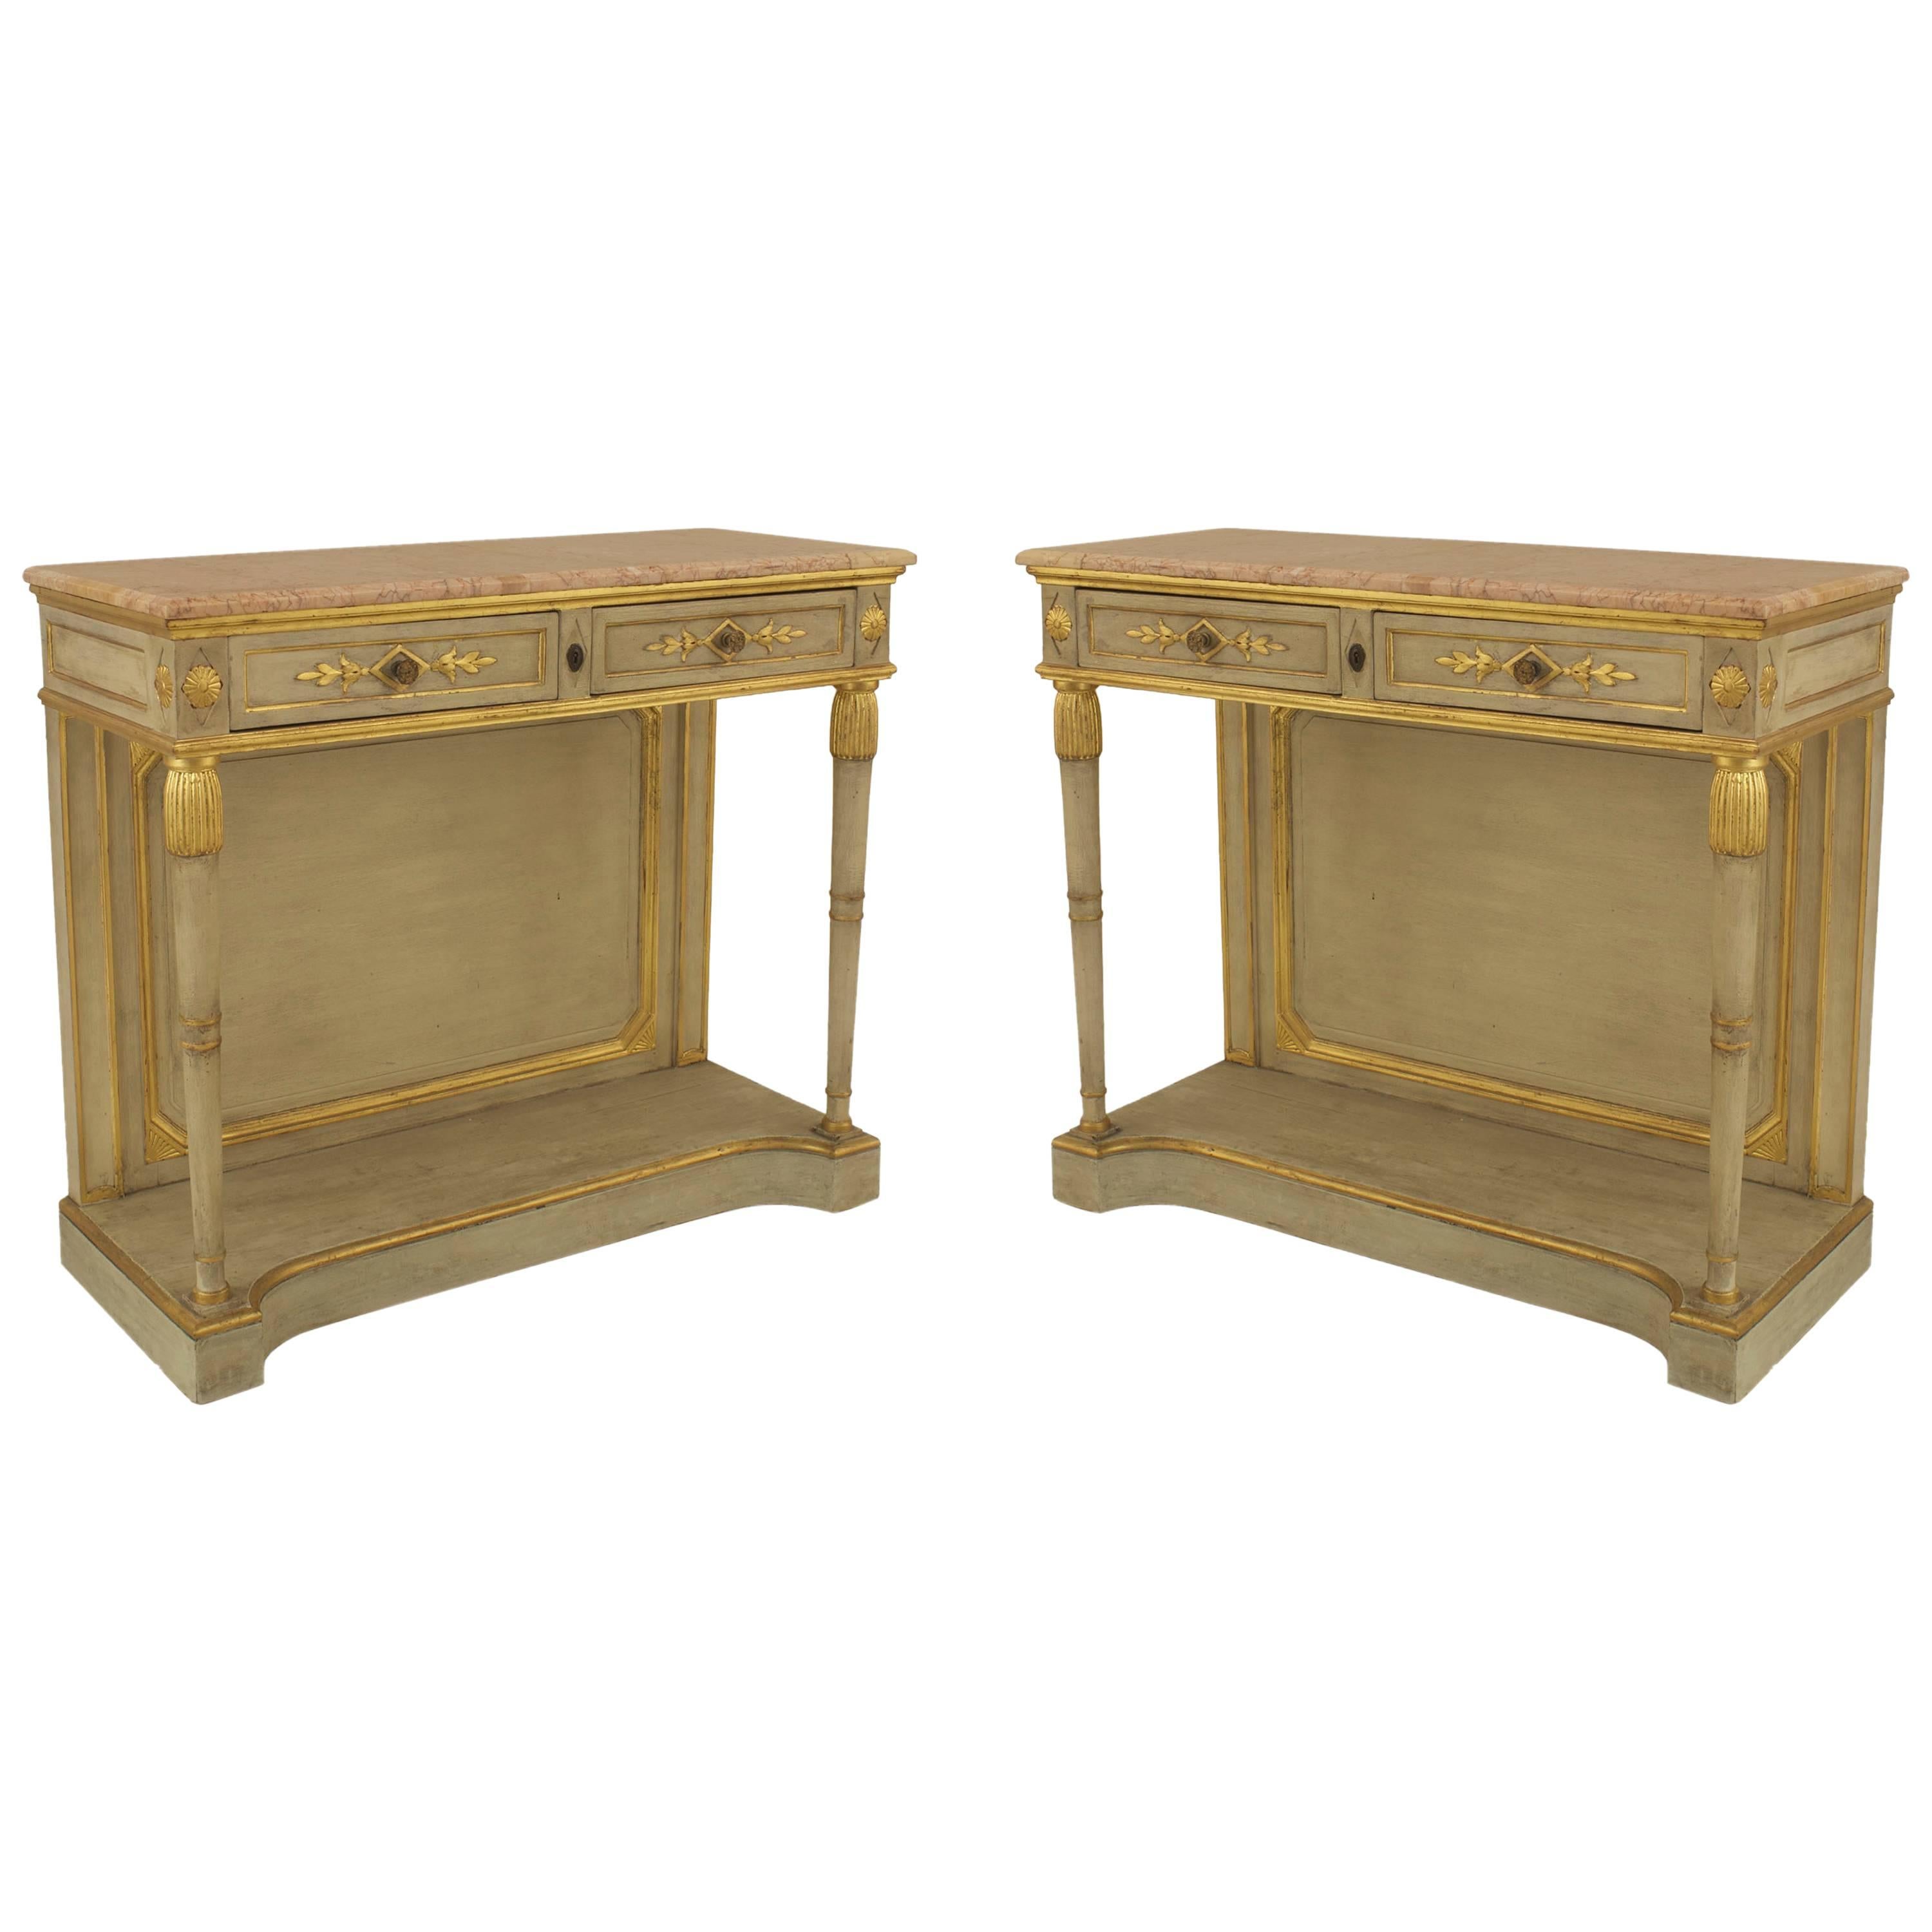 Pair of Neoclassical Parcel-Gilt Cream-Painted Consoles by Jansen